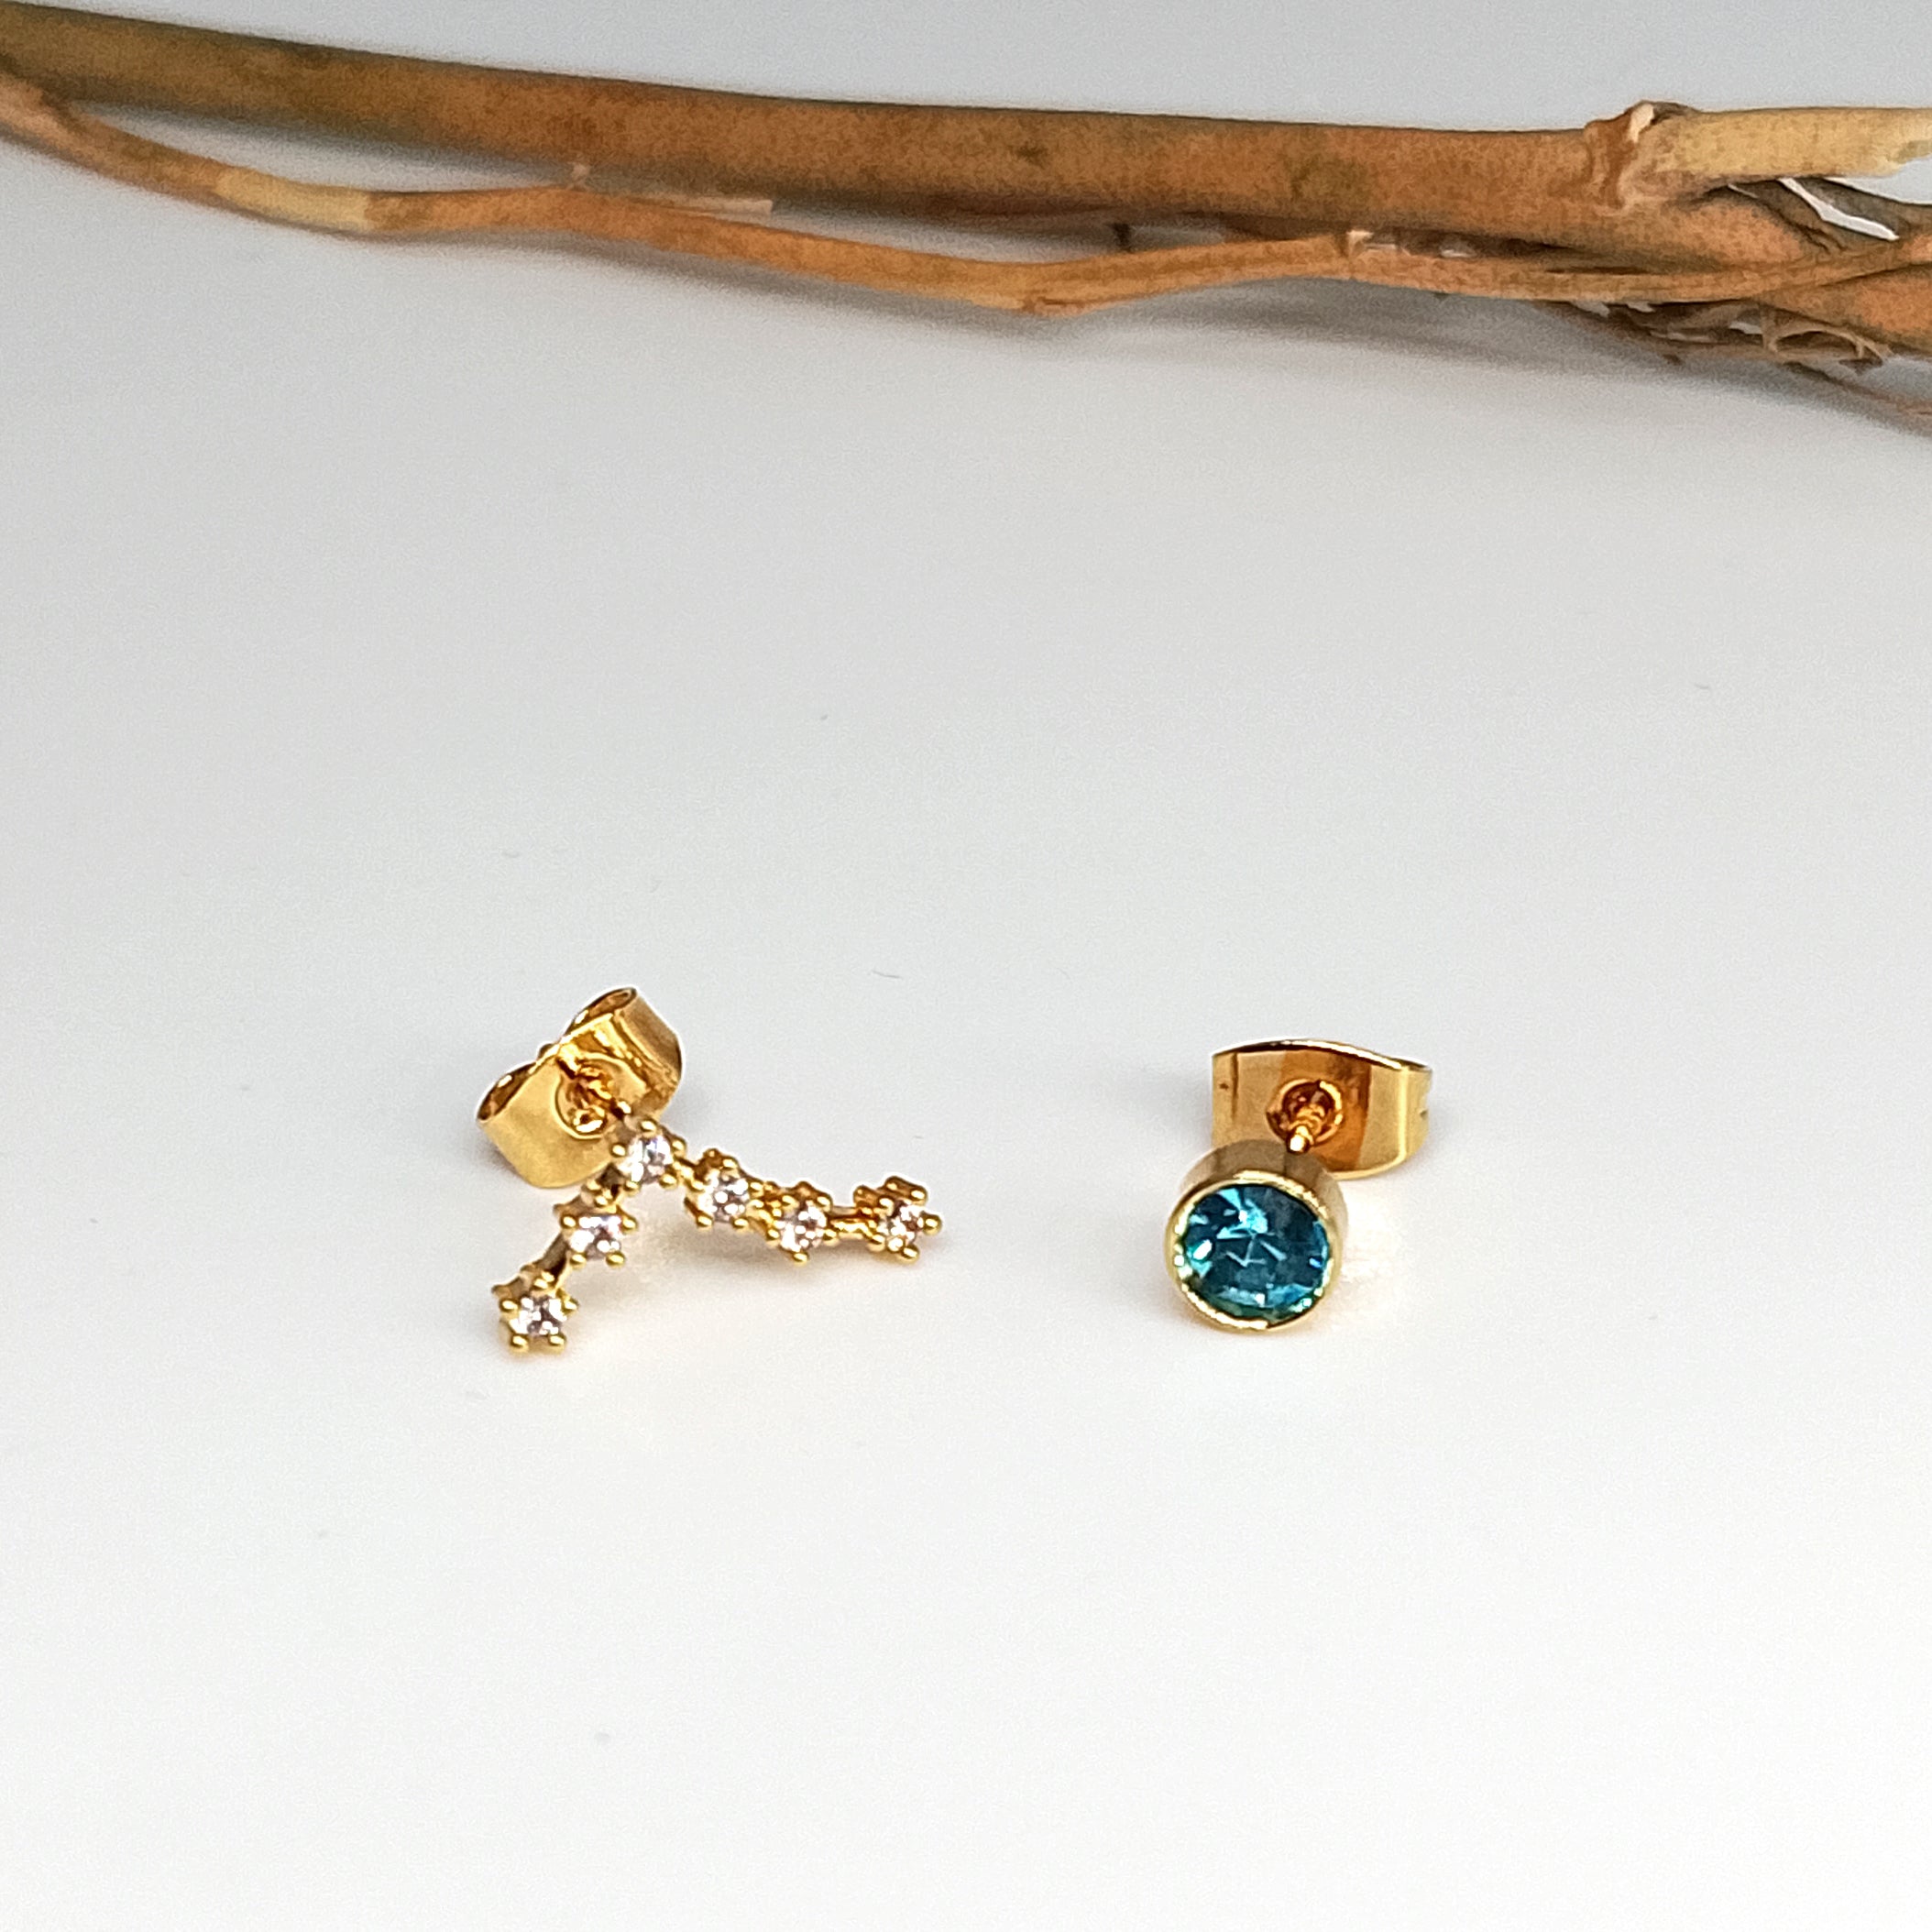 Pisces Constellation Earrings - 24K Gold Plated with Amazonite